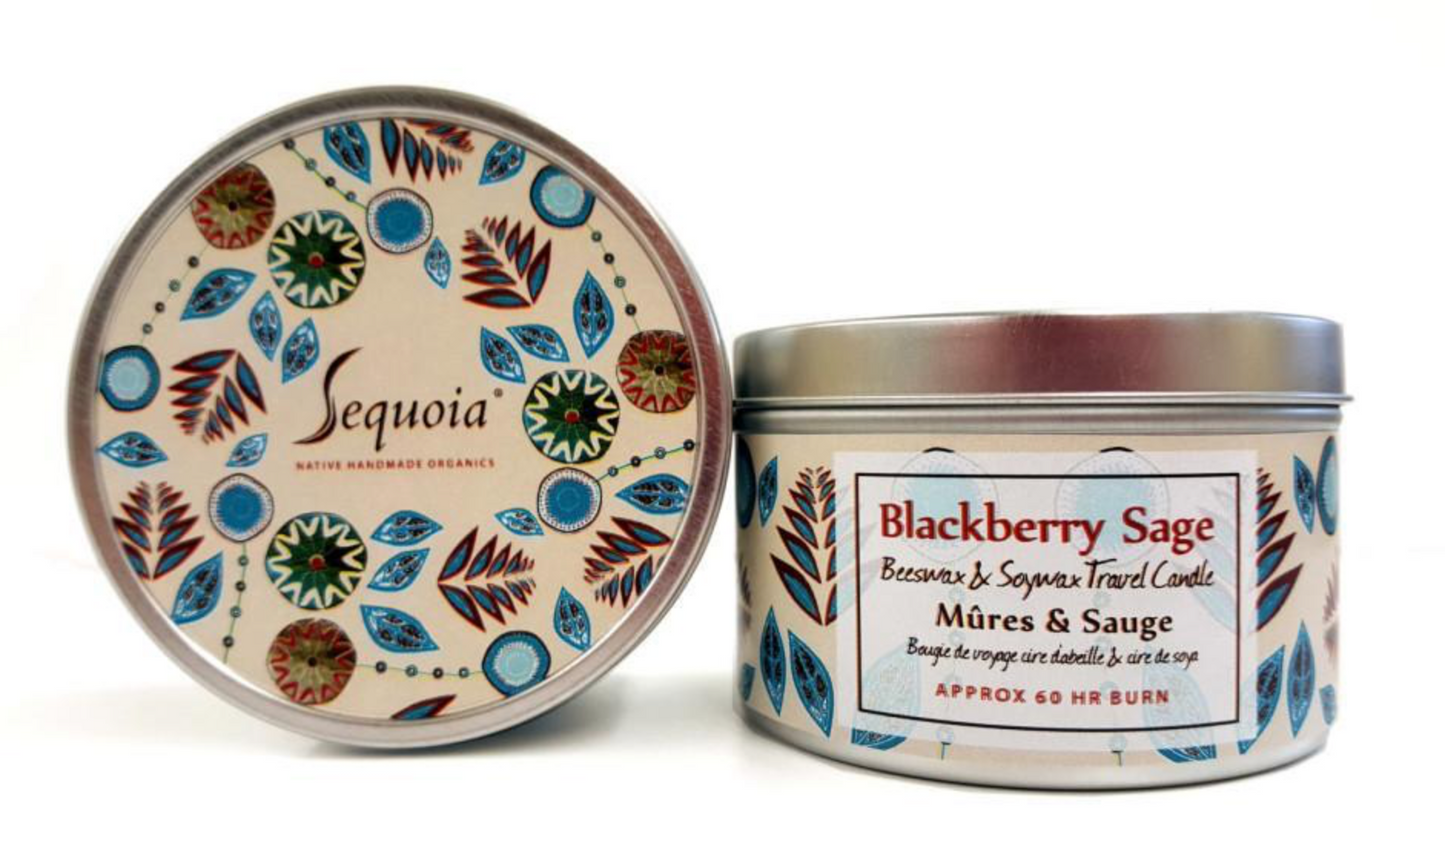 Sequoia Candles